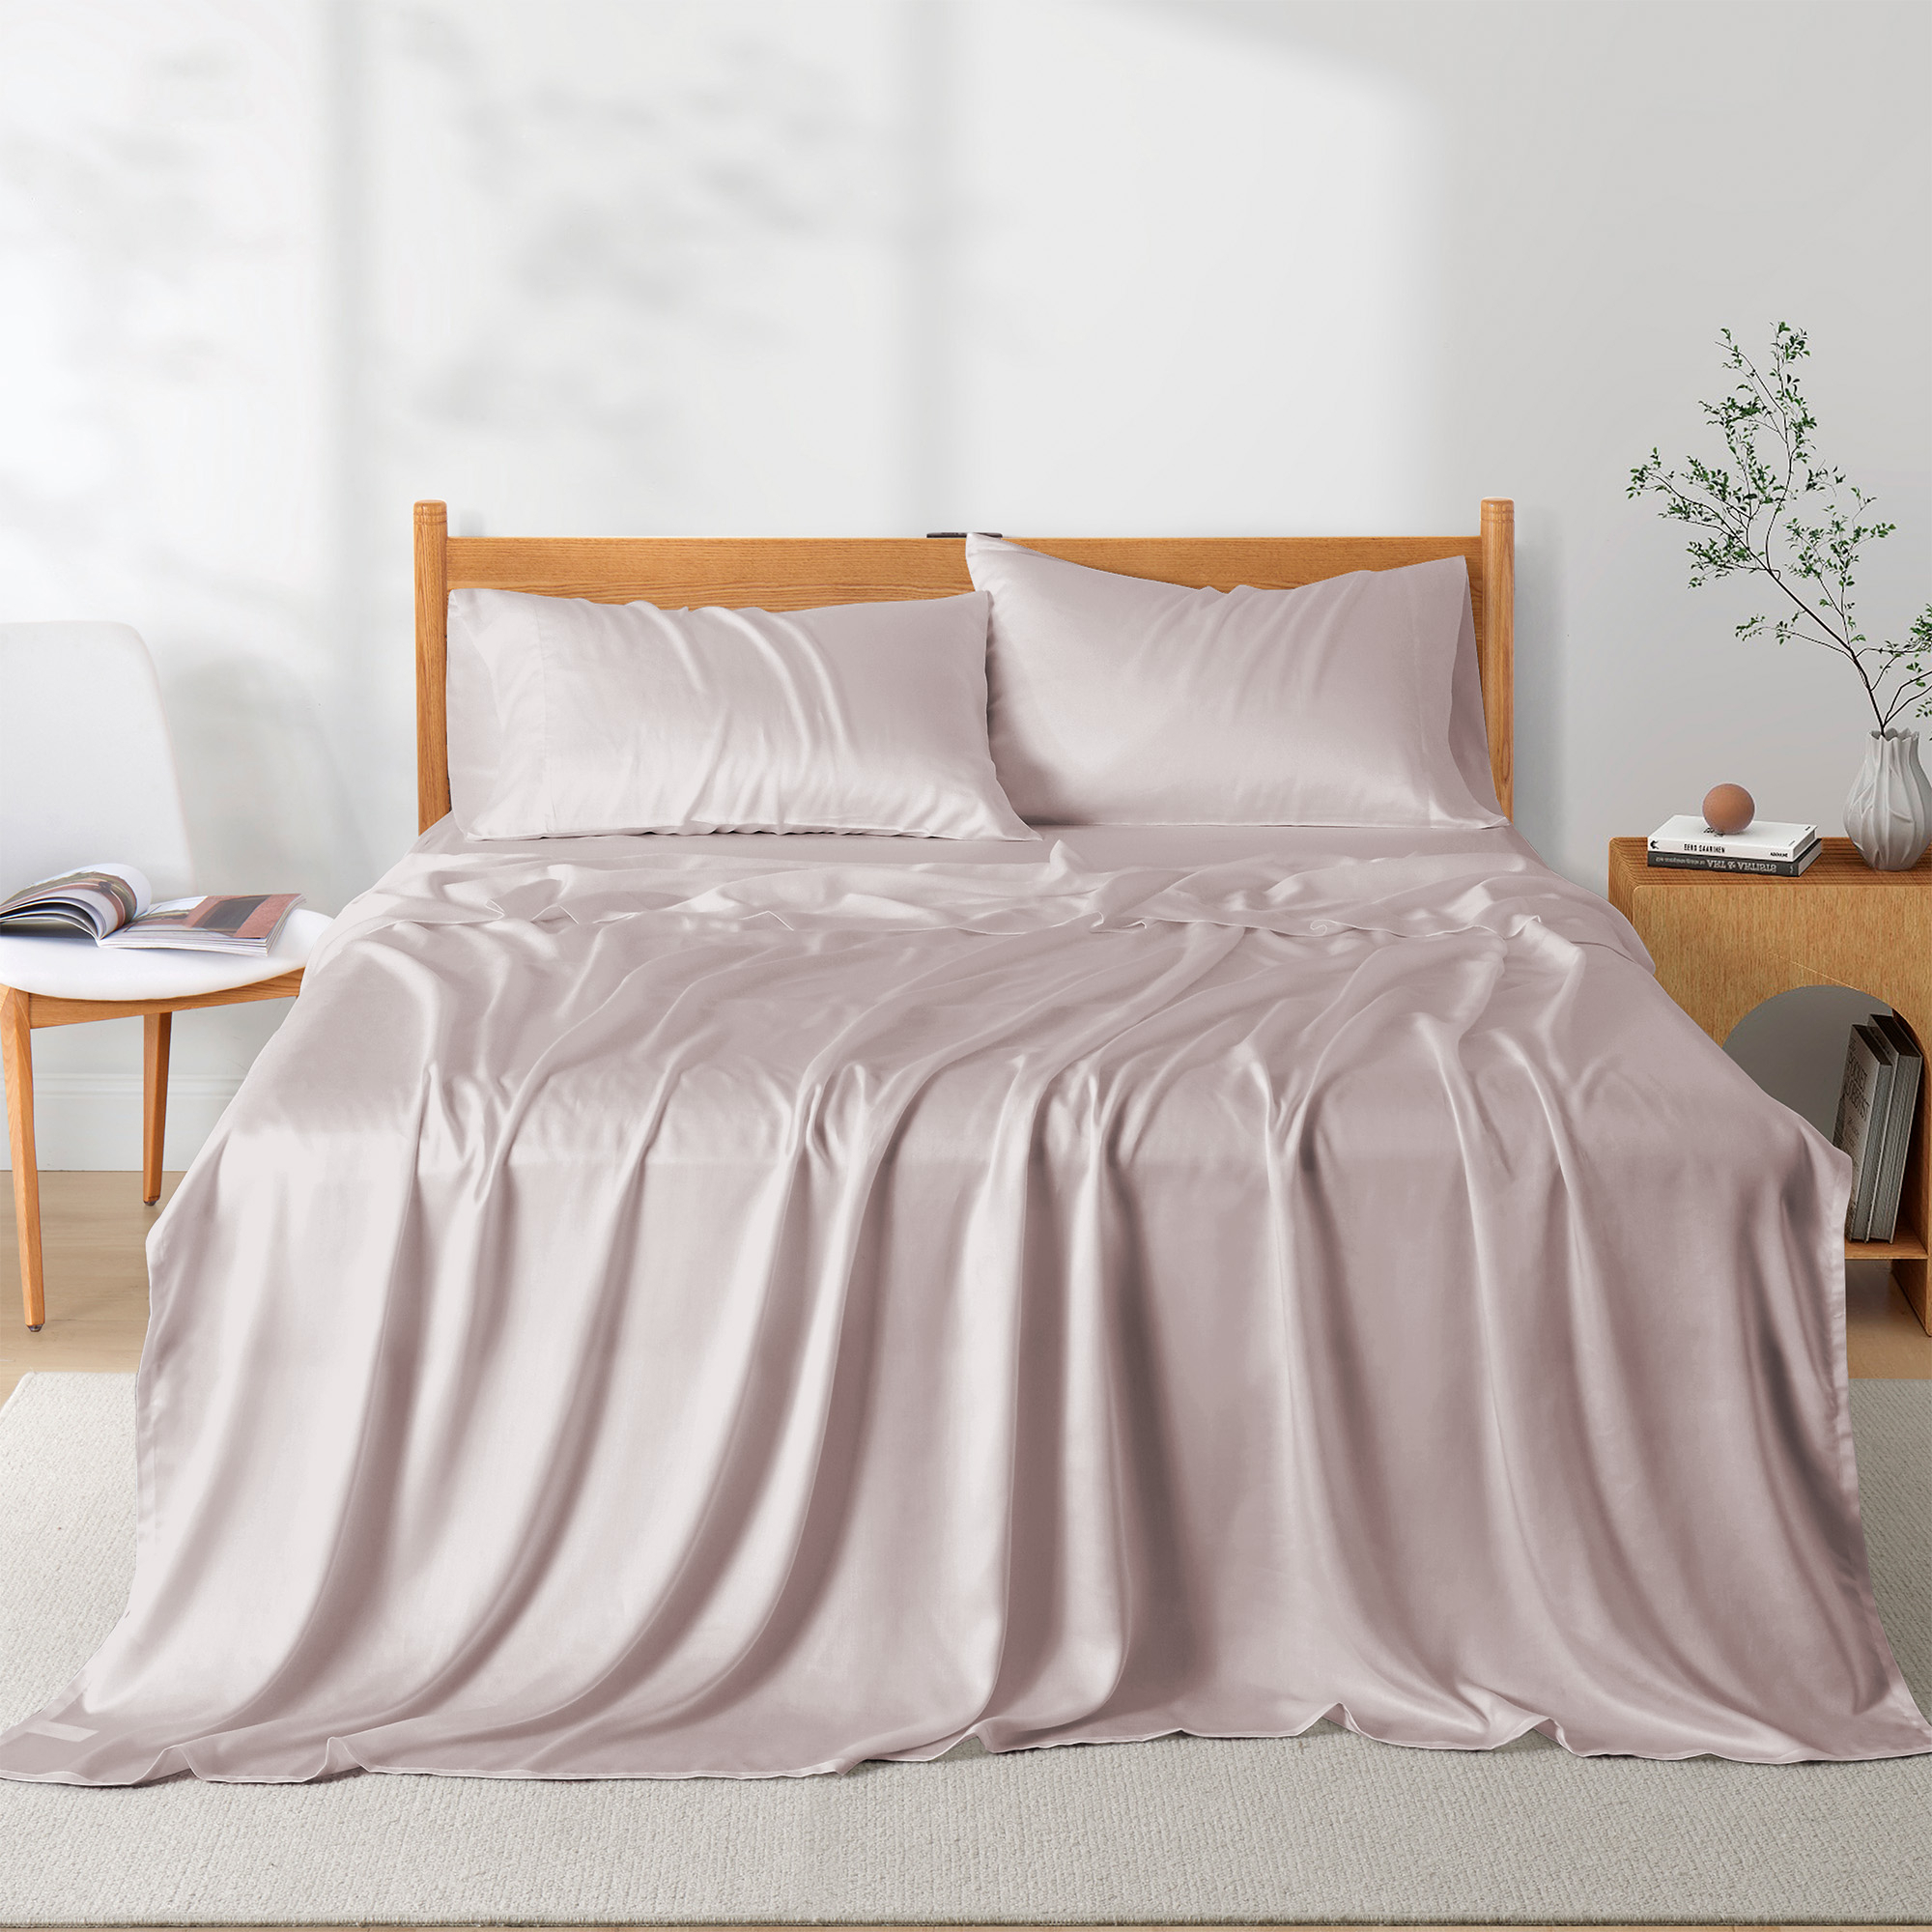 Tencel Lyocell Bed Sheets Silky Soft & Smooth Breathable Sheets, Luxury Hotel Bedding - Full Size